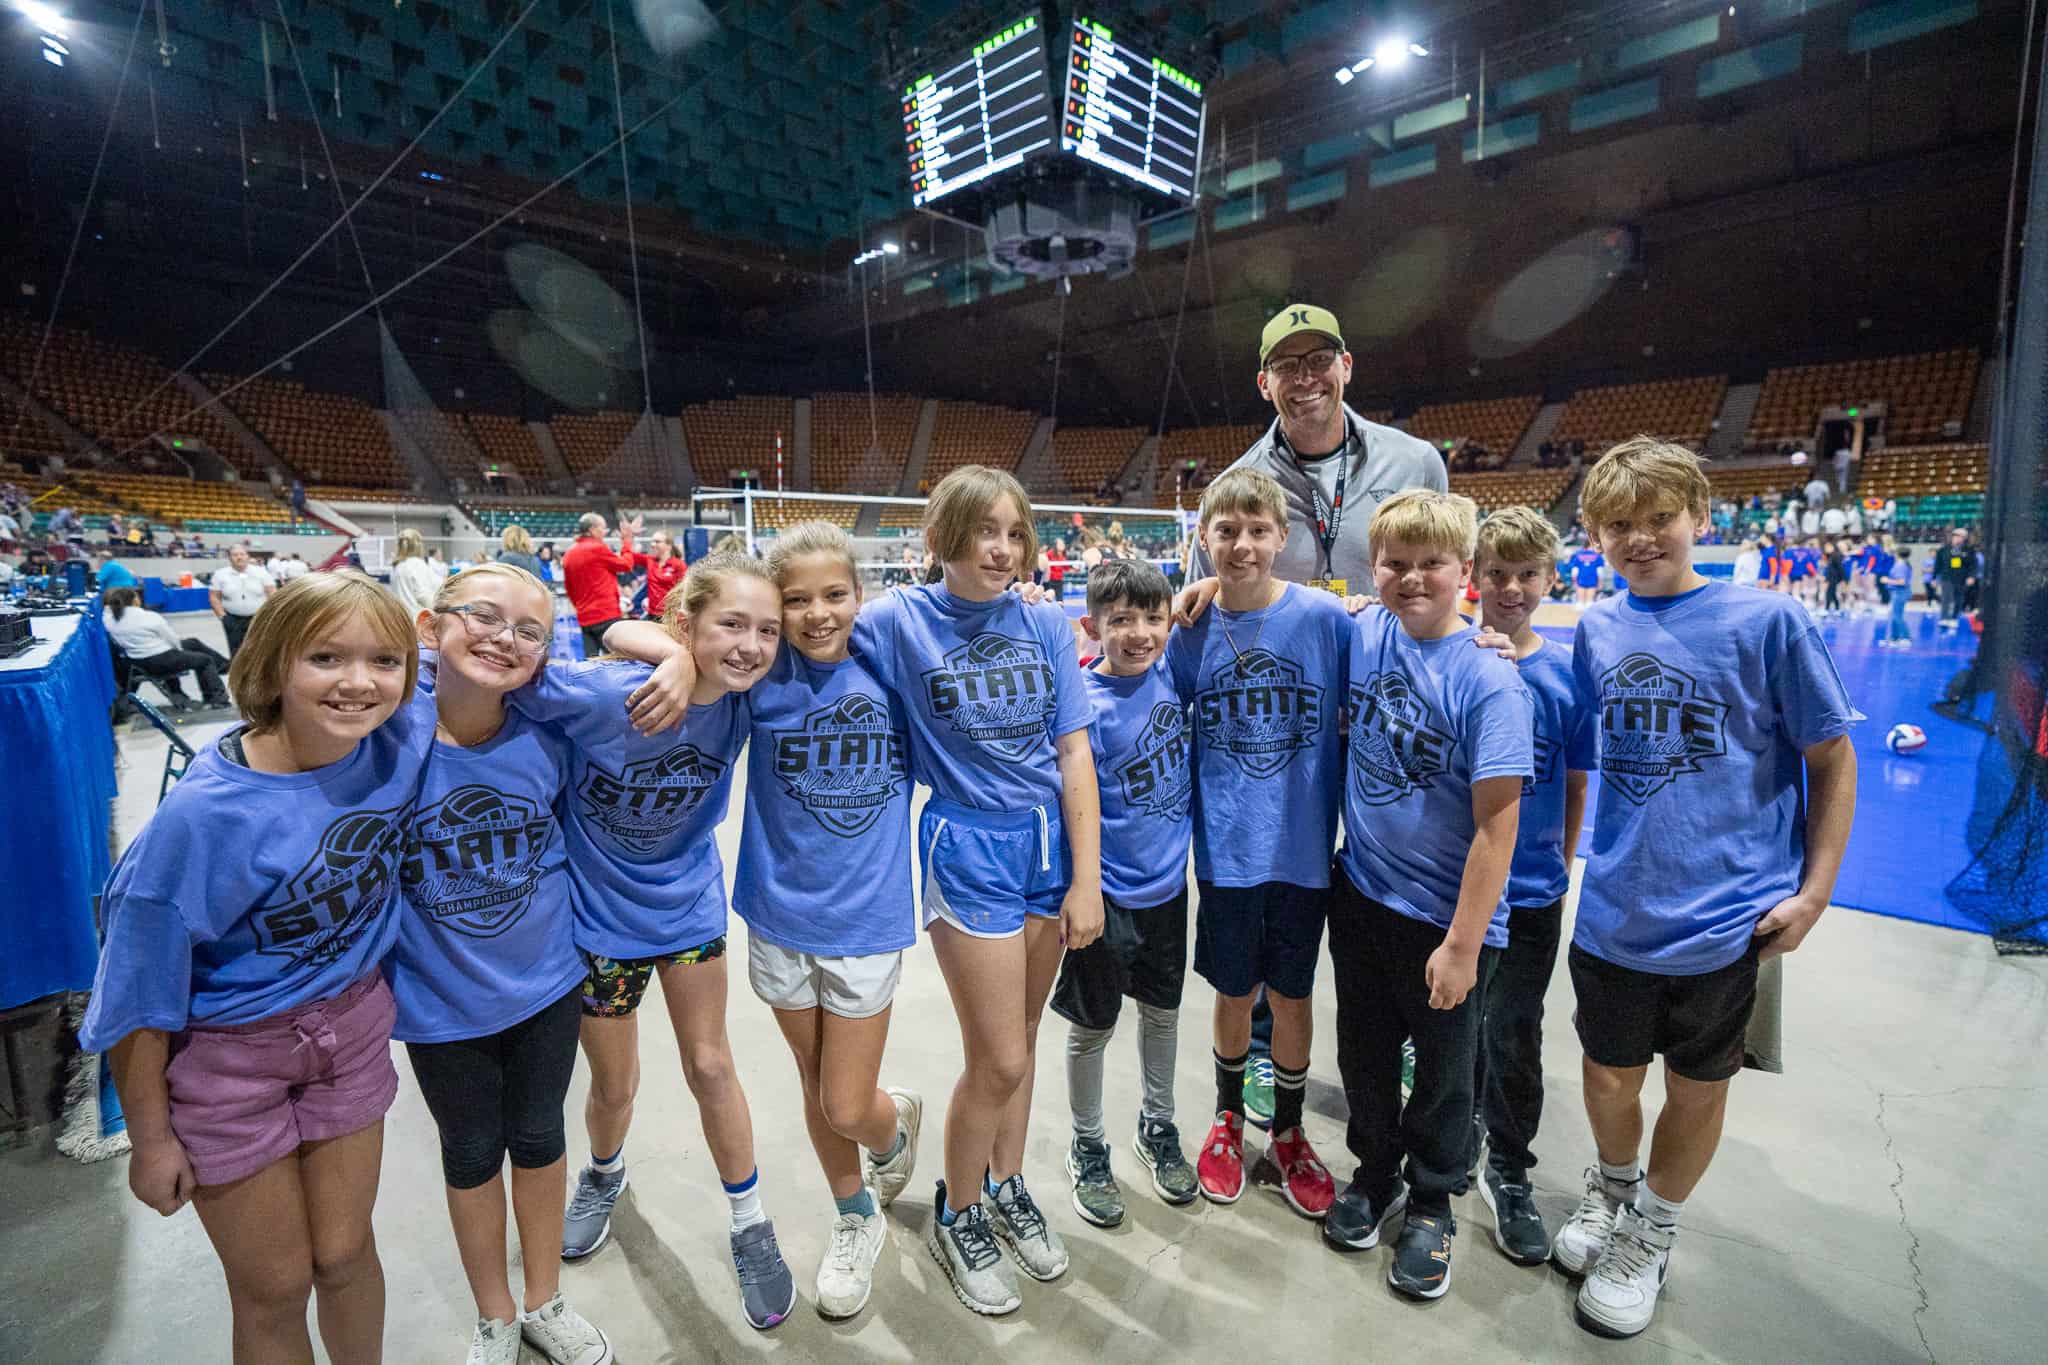 Students from Longmont Estates get ready to shag volleyballs for the State Tournament